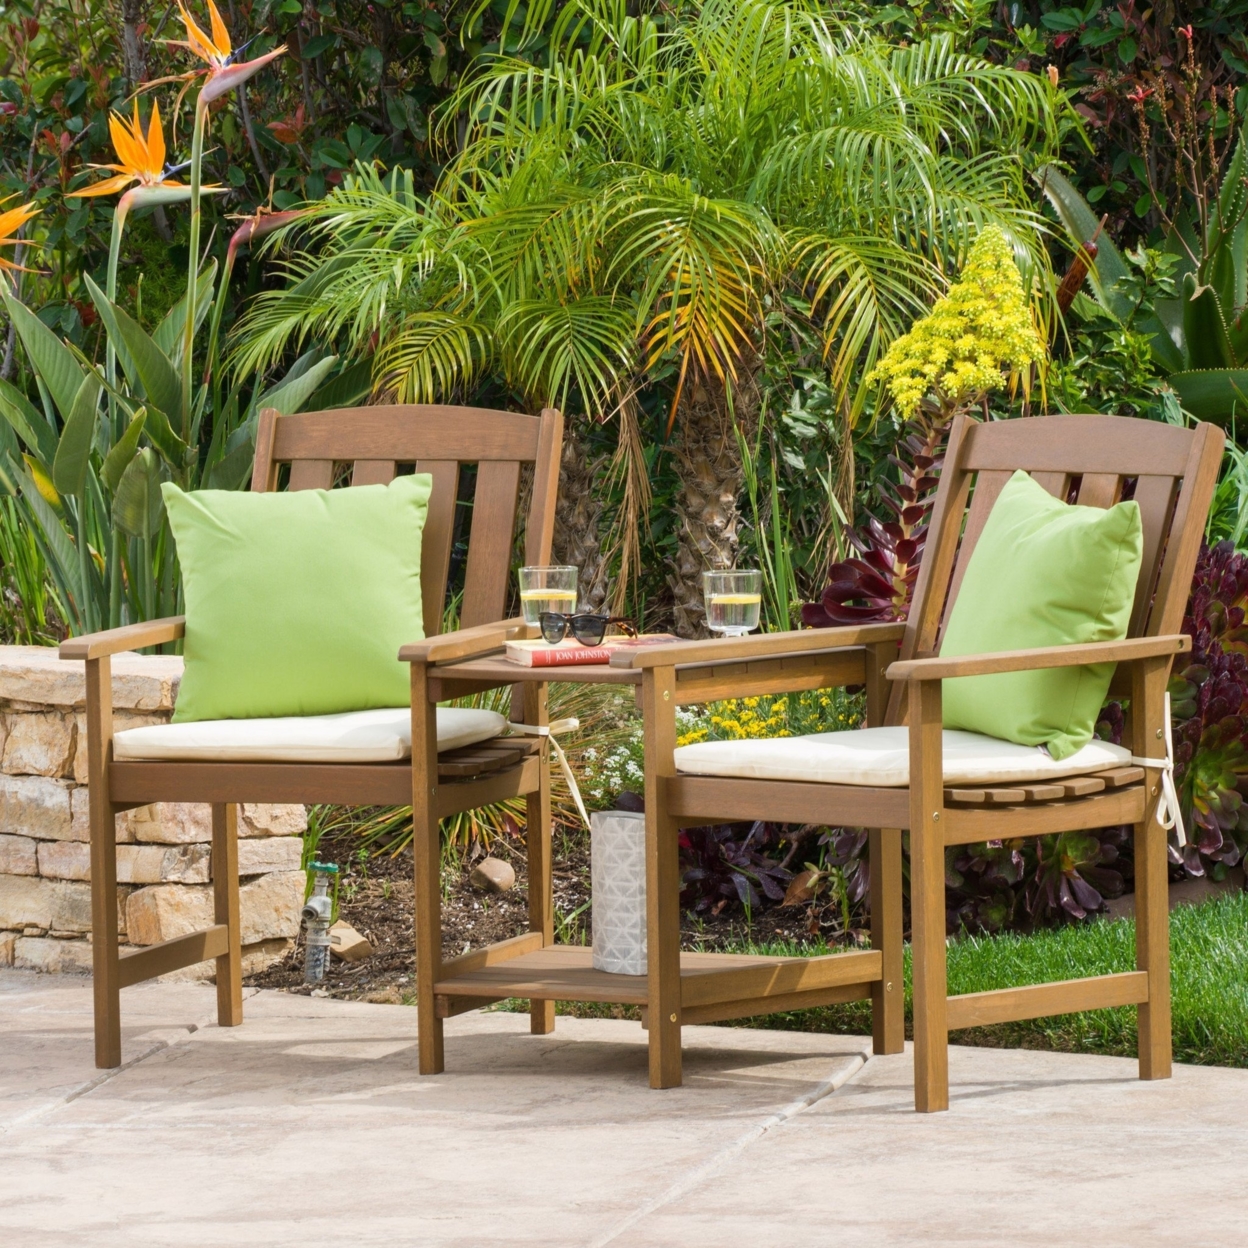 Las Brisas Outdoor Wood Adjoining 2-Seater Chairs With Cushions